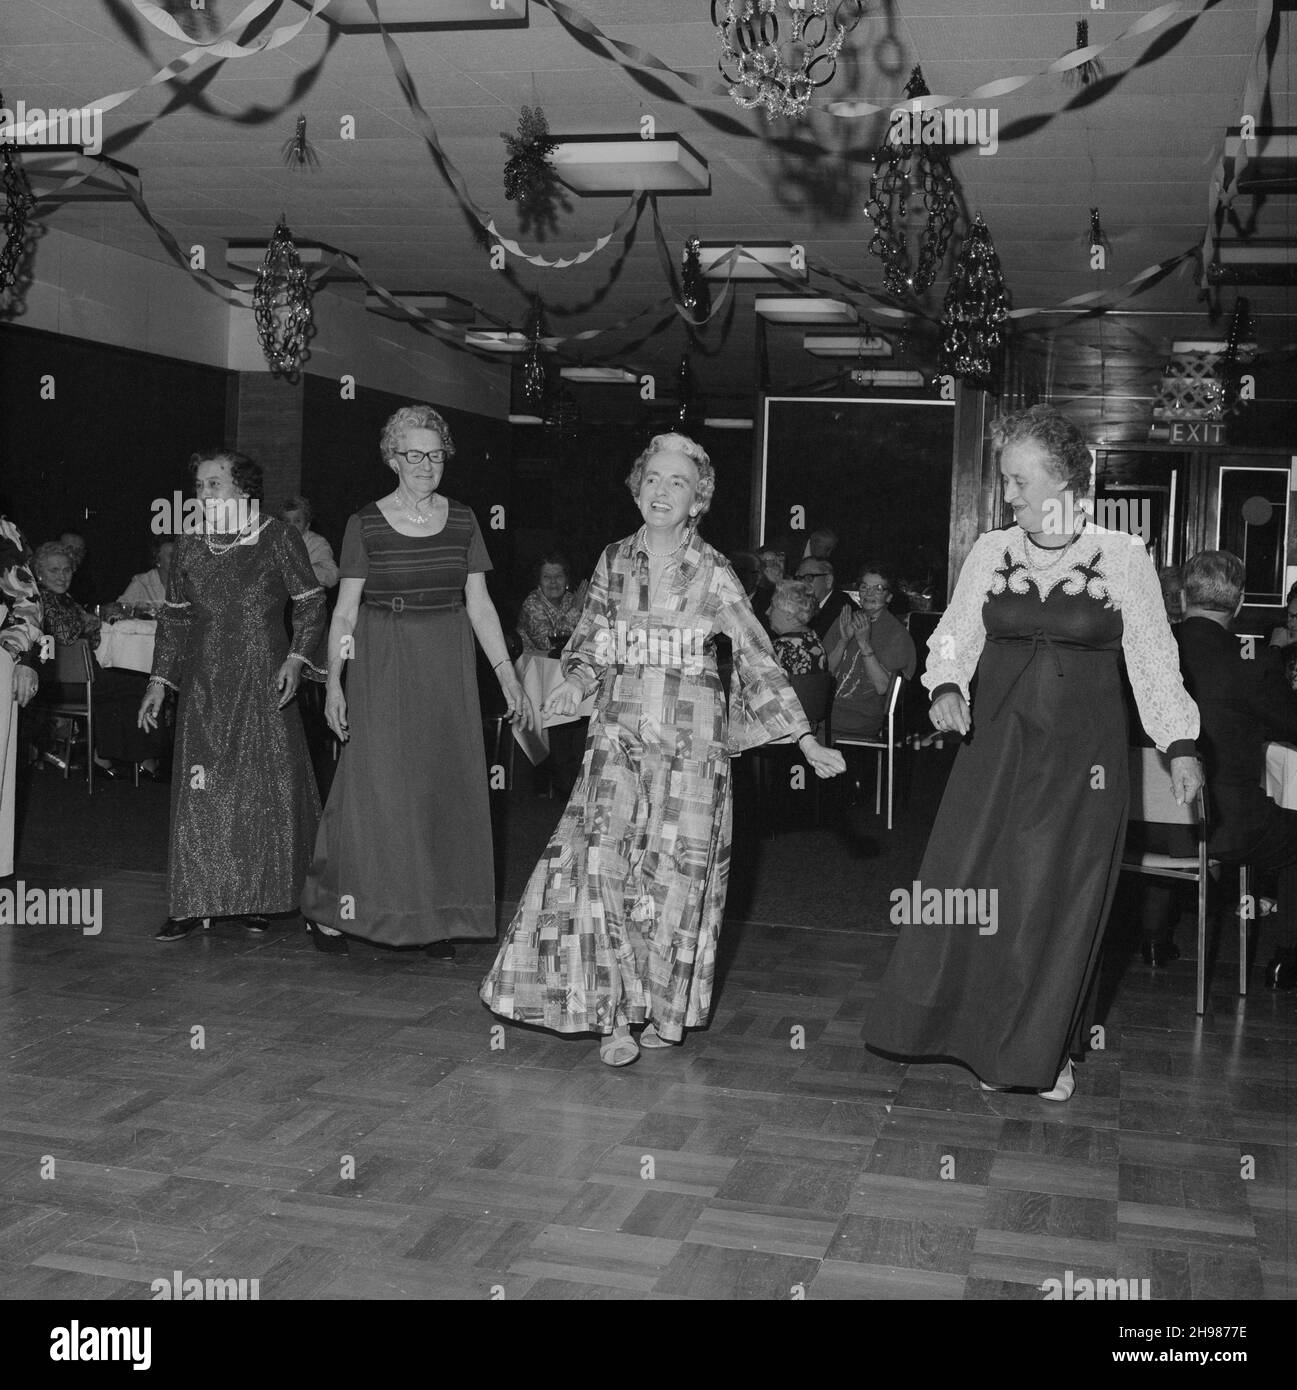 John Laing and Son Limited, Page Street, Mill Hill, Barnet, London, 14/12/1978. Four women in evening gowns on the dance floor at the Laing Senior Citizens Christmas dinner and dance at Mill Hill. The dinner and dance was held in the restaurant at Laing's Mill Hill office. There was a three-course turkey dinner, dancing and tombola draws throughout the evening. Stock Photo